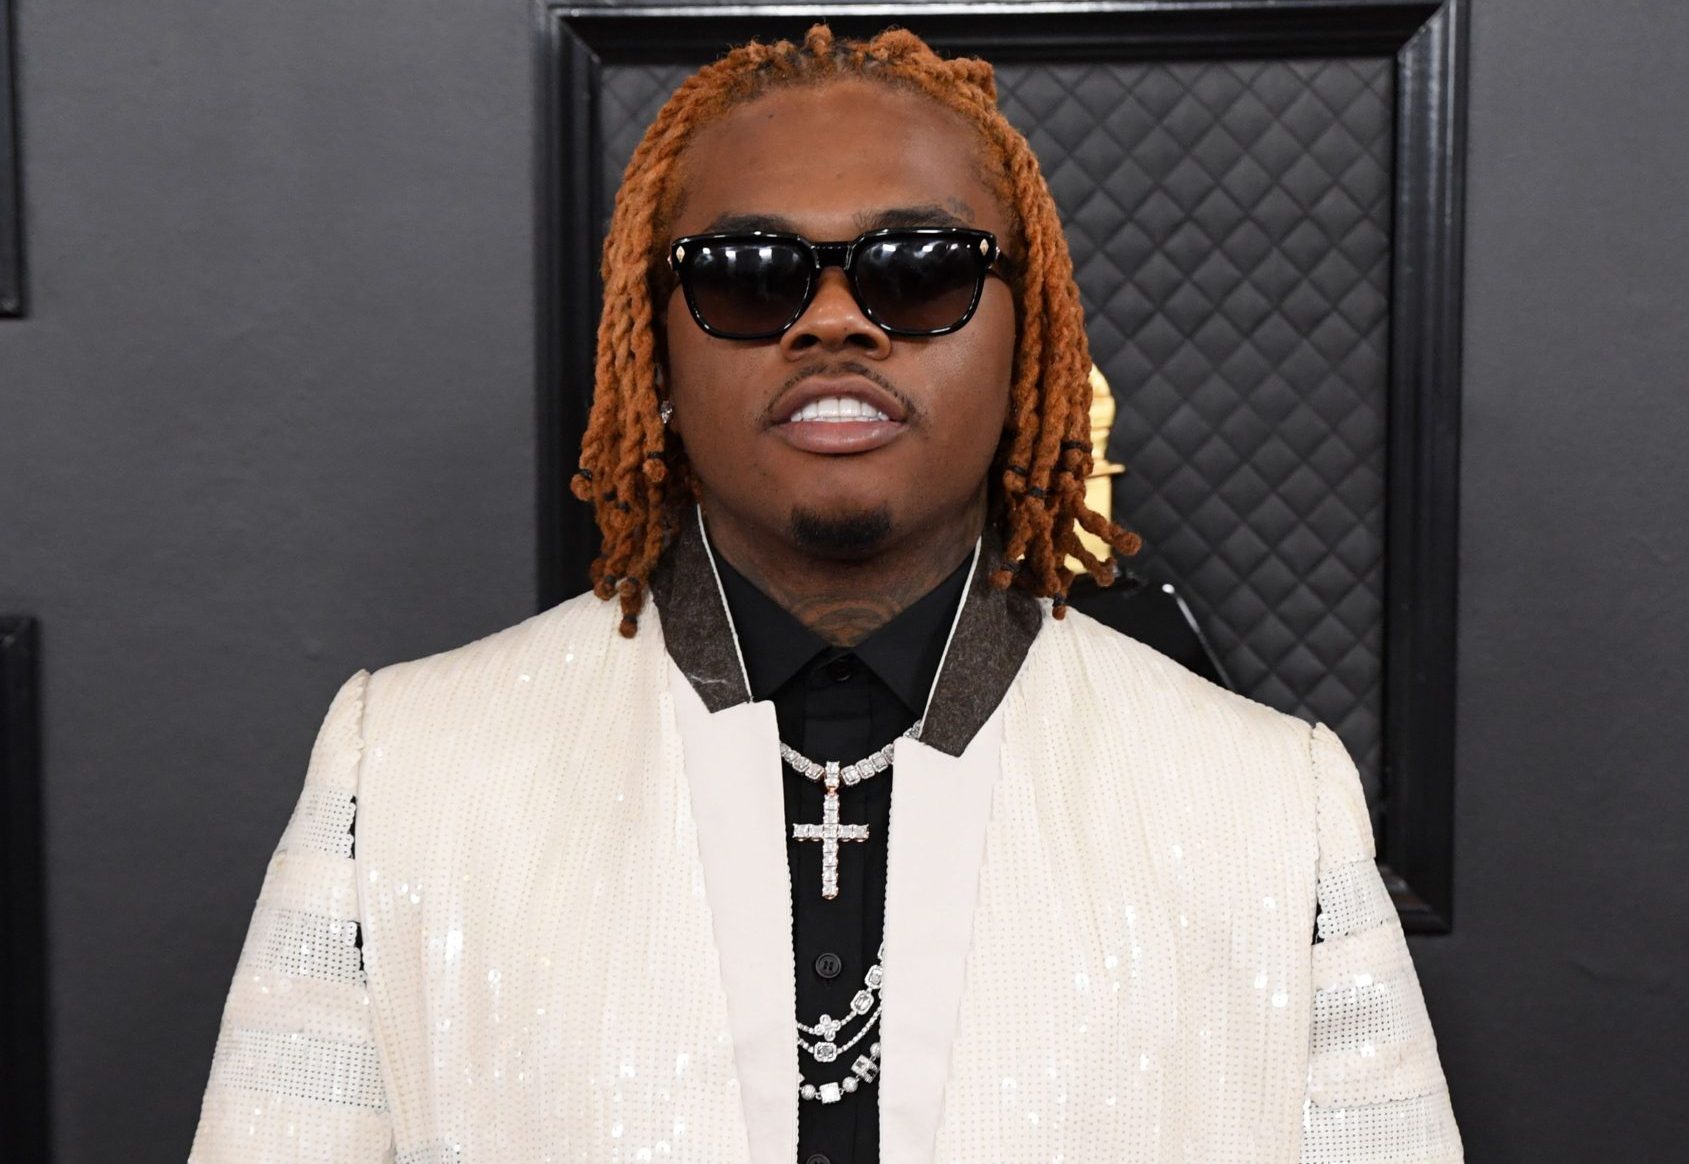 Judge Denies Bond For Gunna, Sets 2023 Trial Date for YSL Indictment